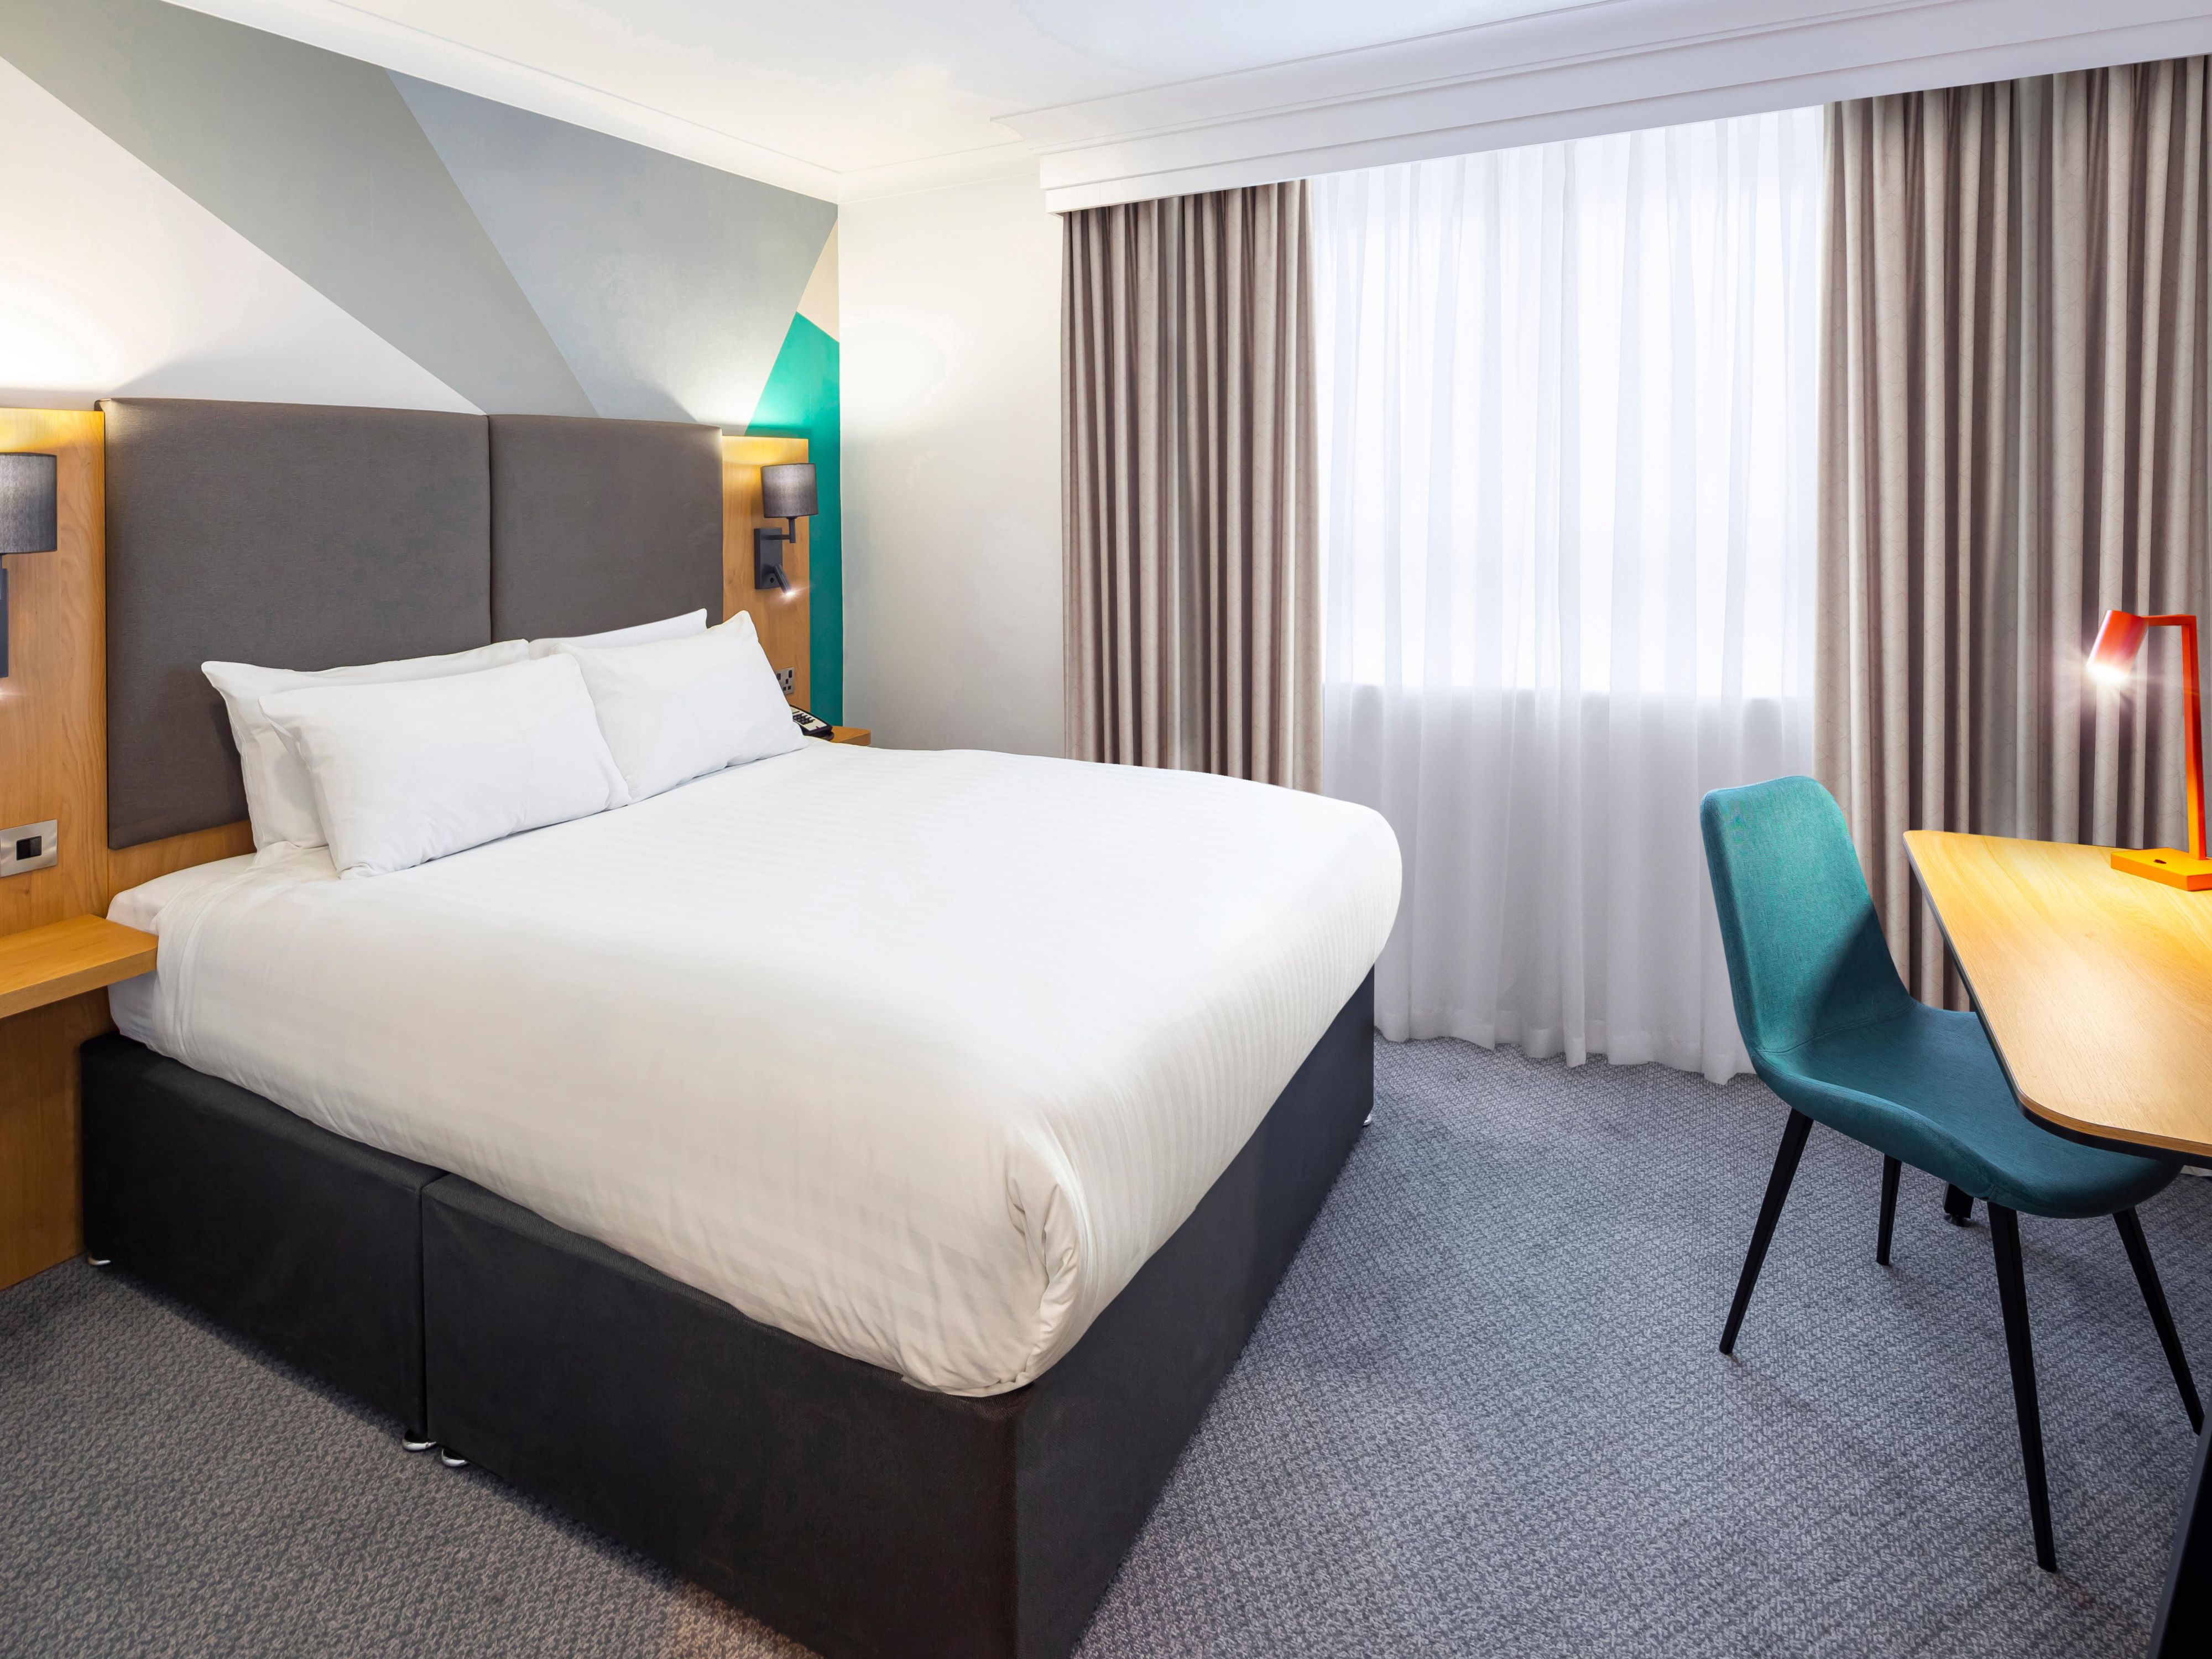 We are very proud to present to you our 129 refurbished bedrooms. We hope you agree they look amazing!